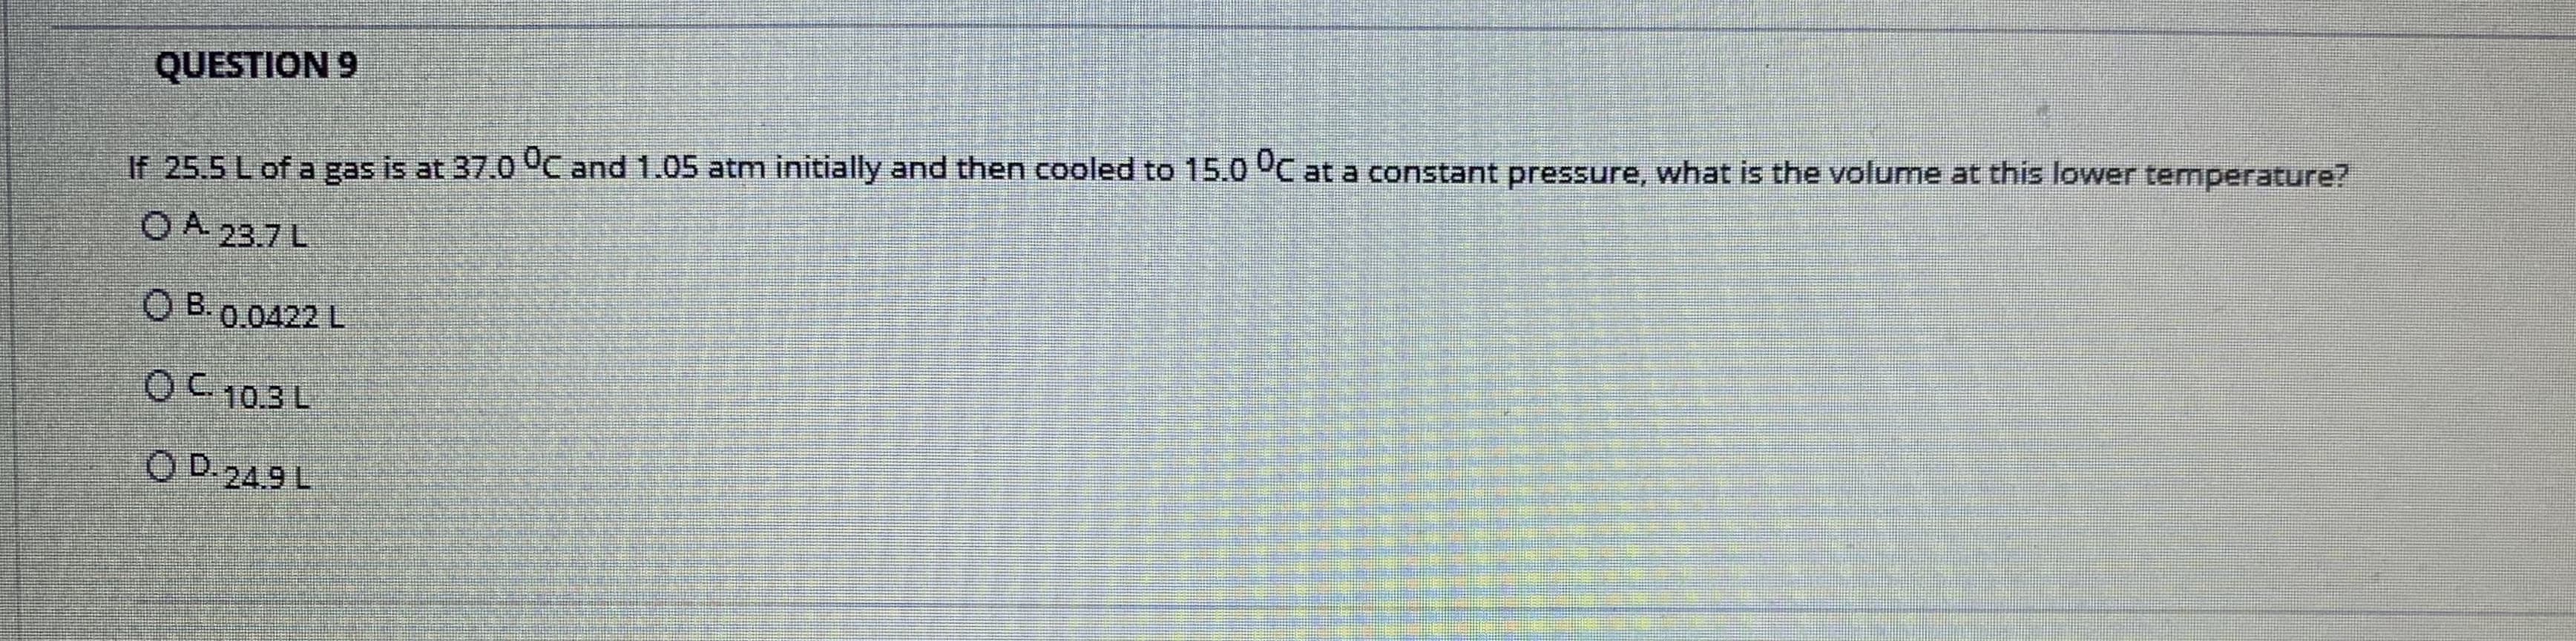 If 25.5 L of a gas is at 37.0 °C and 1.05 atm initially and then cooled to 15.0 °C at a constant pressure, what is the volume at this lower temperature?
